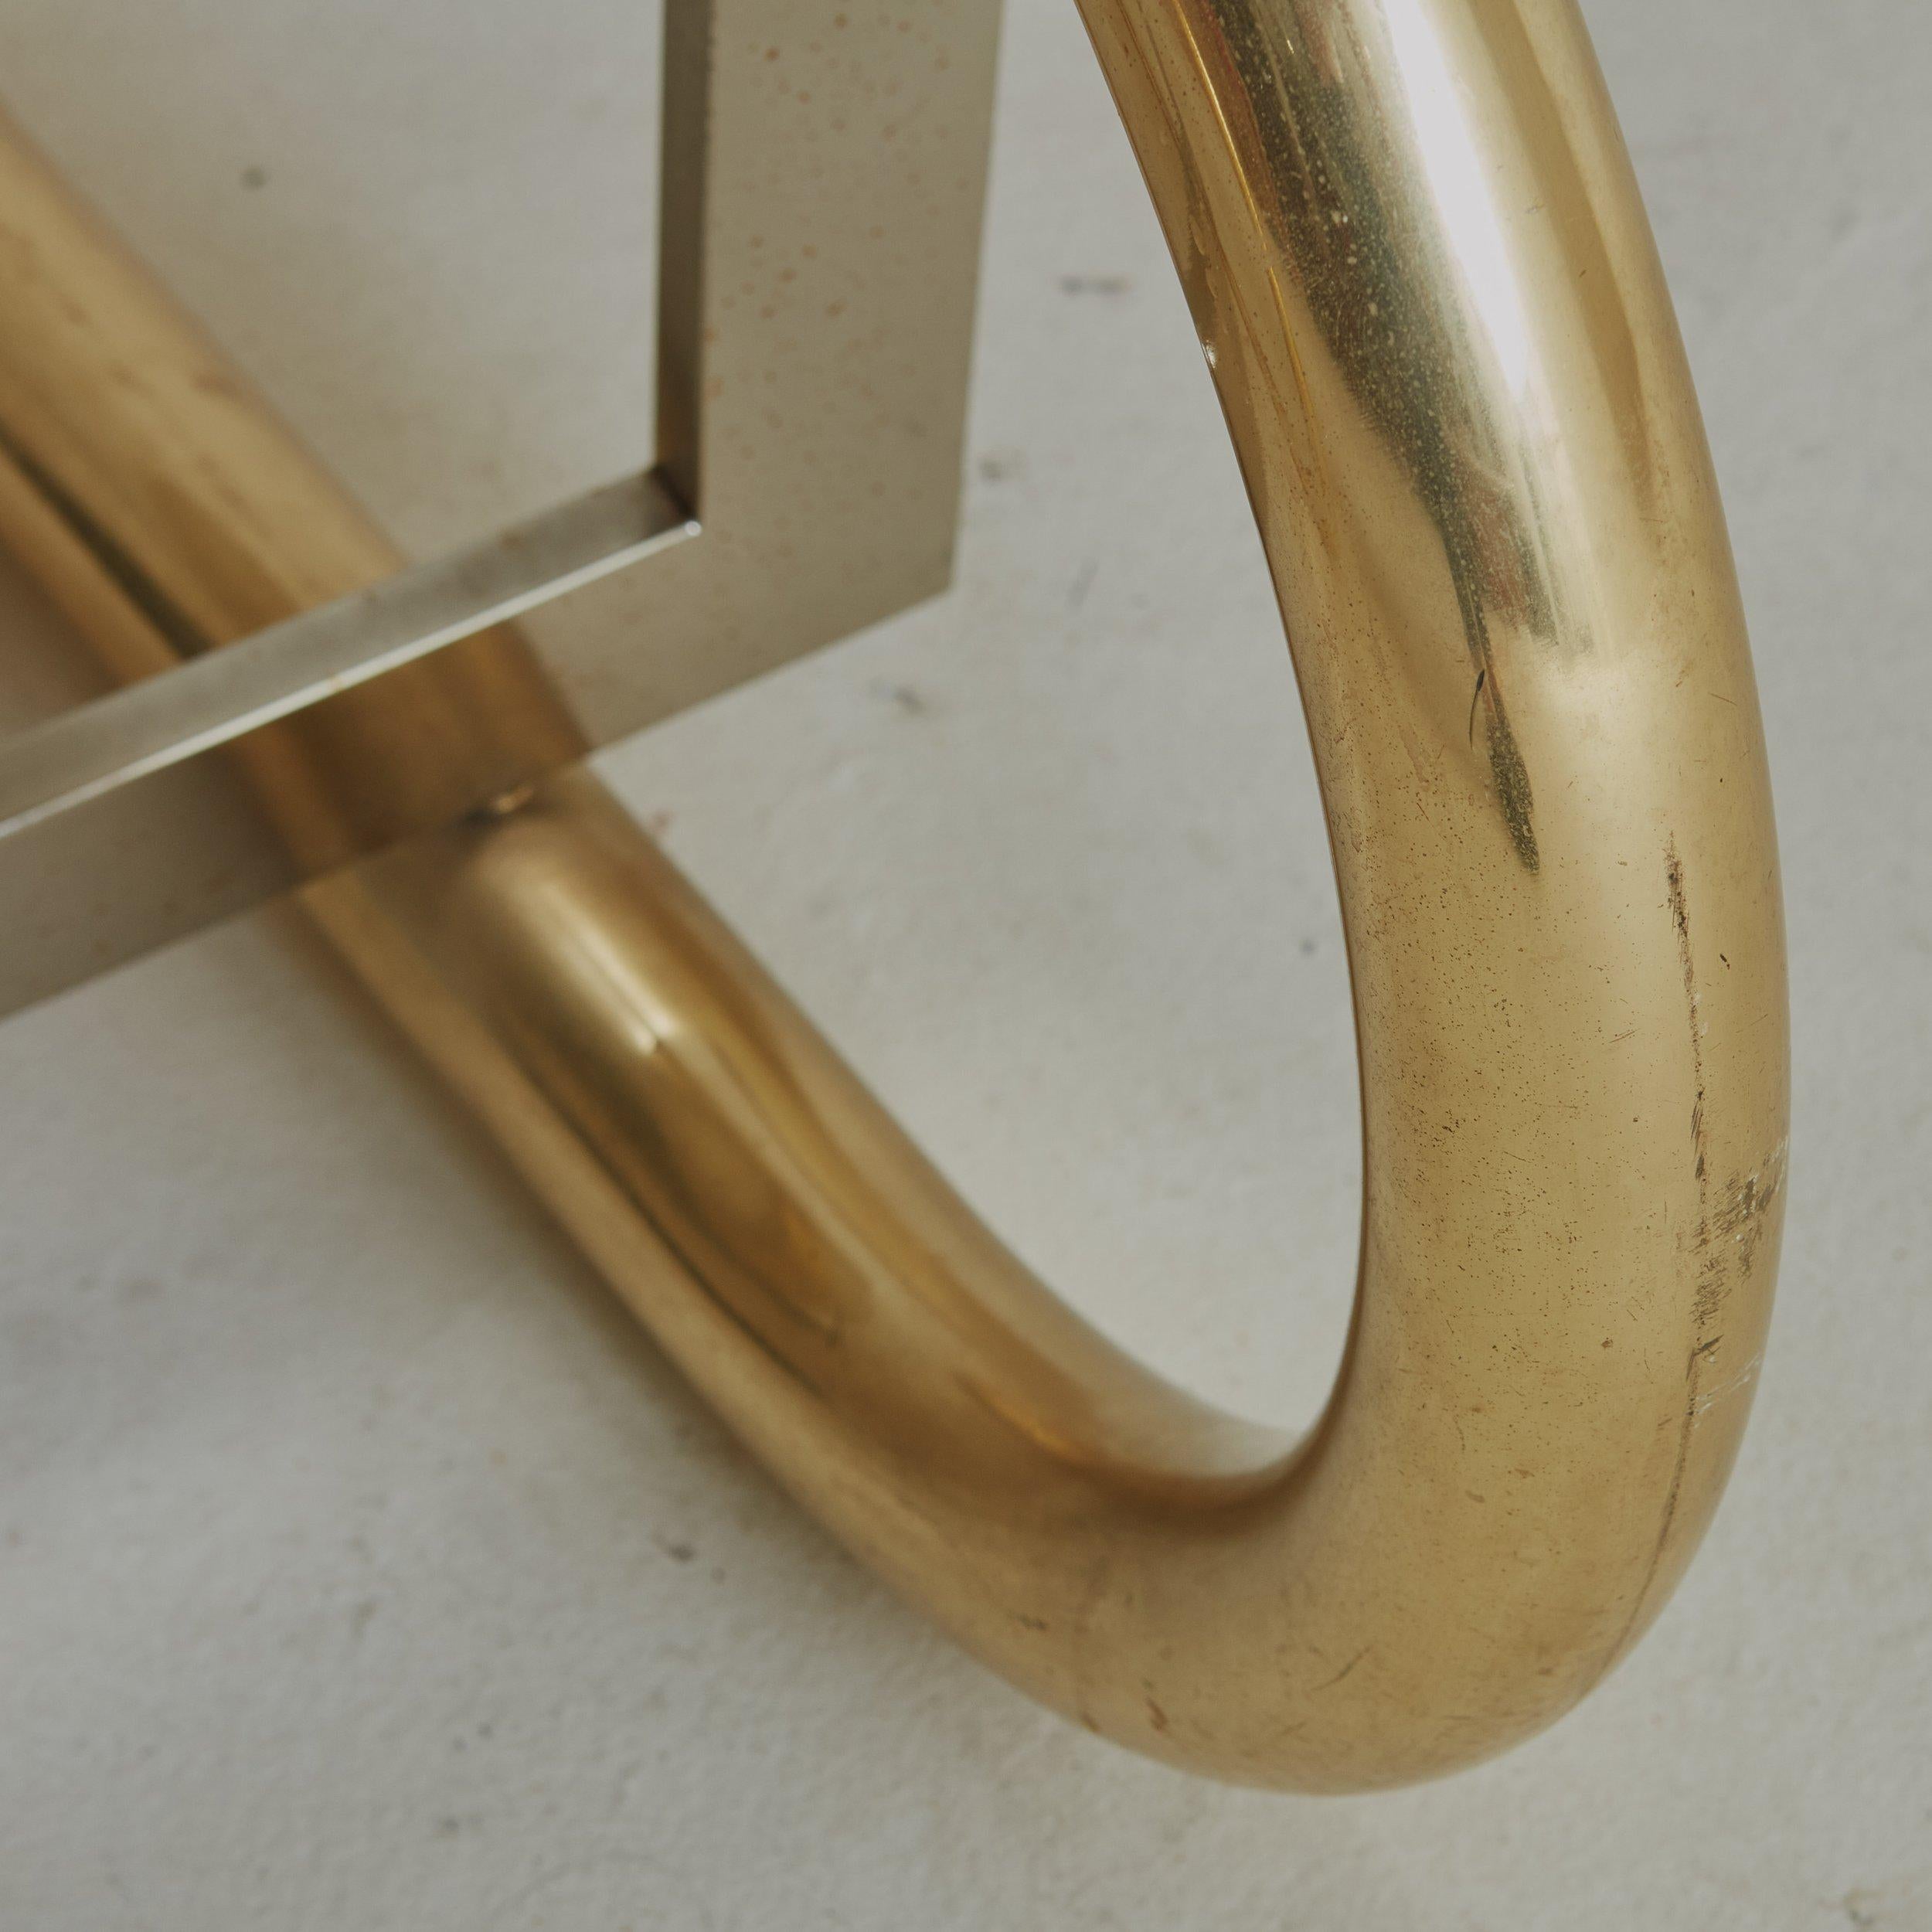 Curved Brass Frame Sling Chair in Original White Leather, Italy 1970s For Sale 5